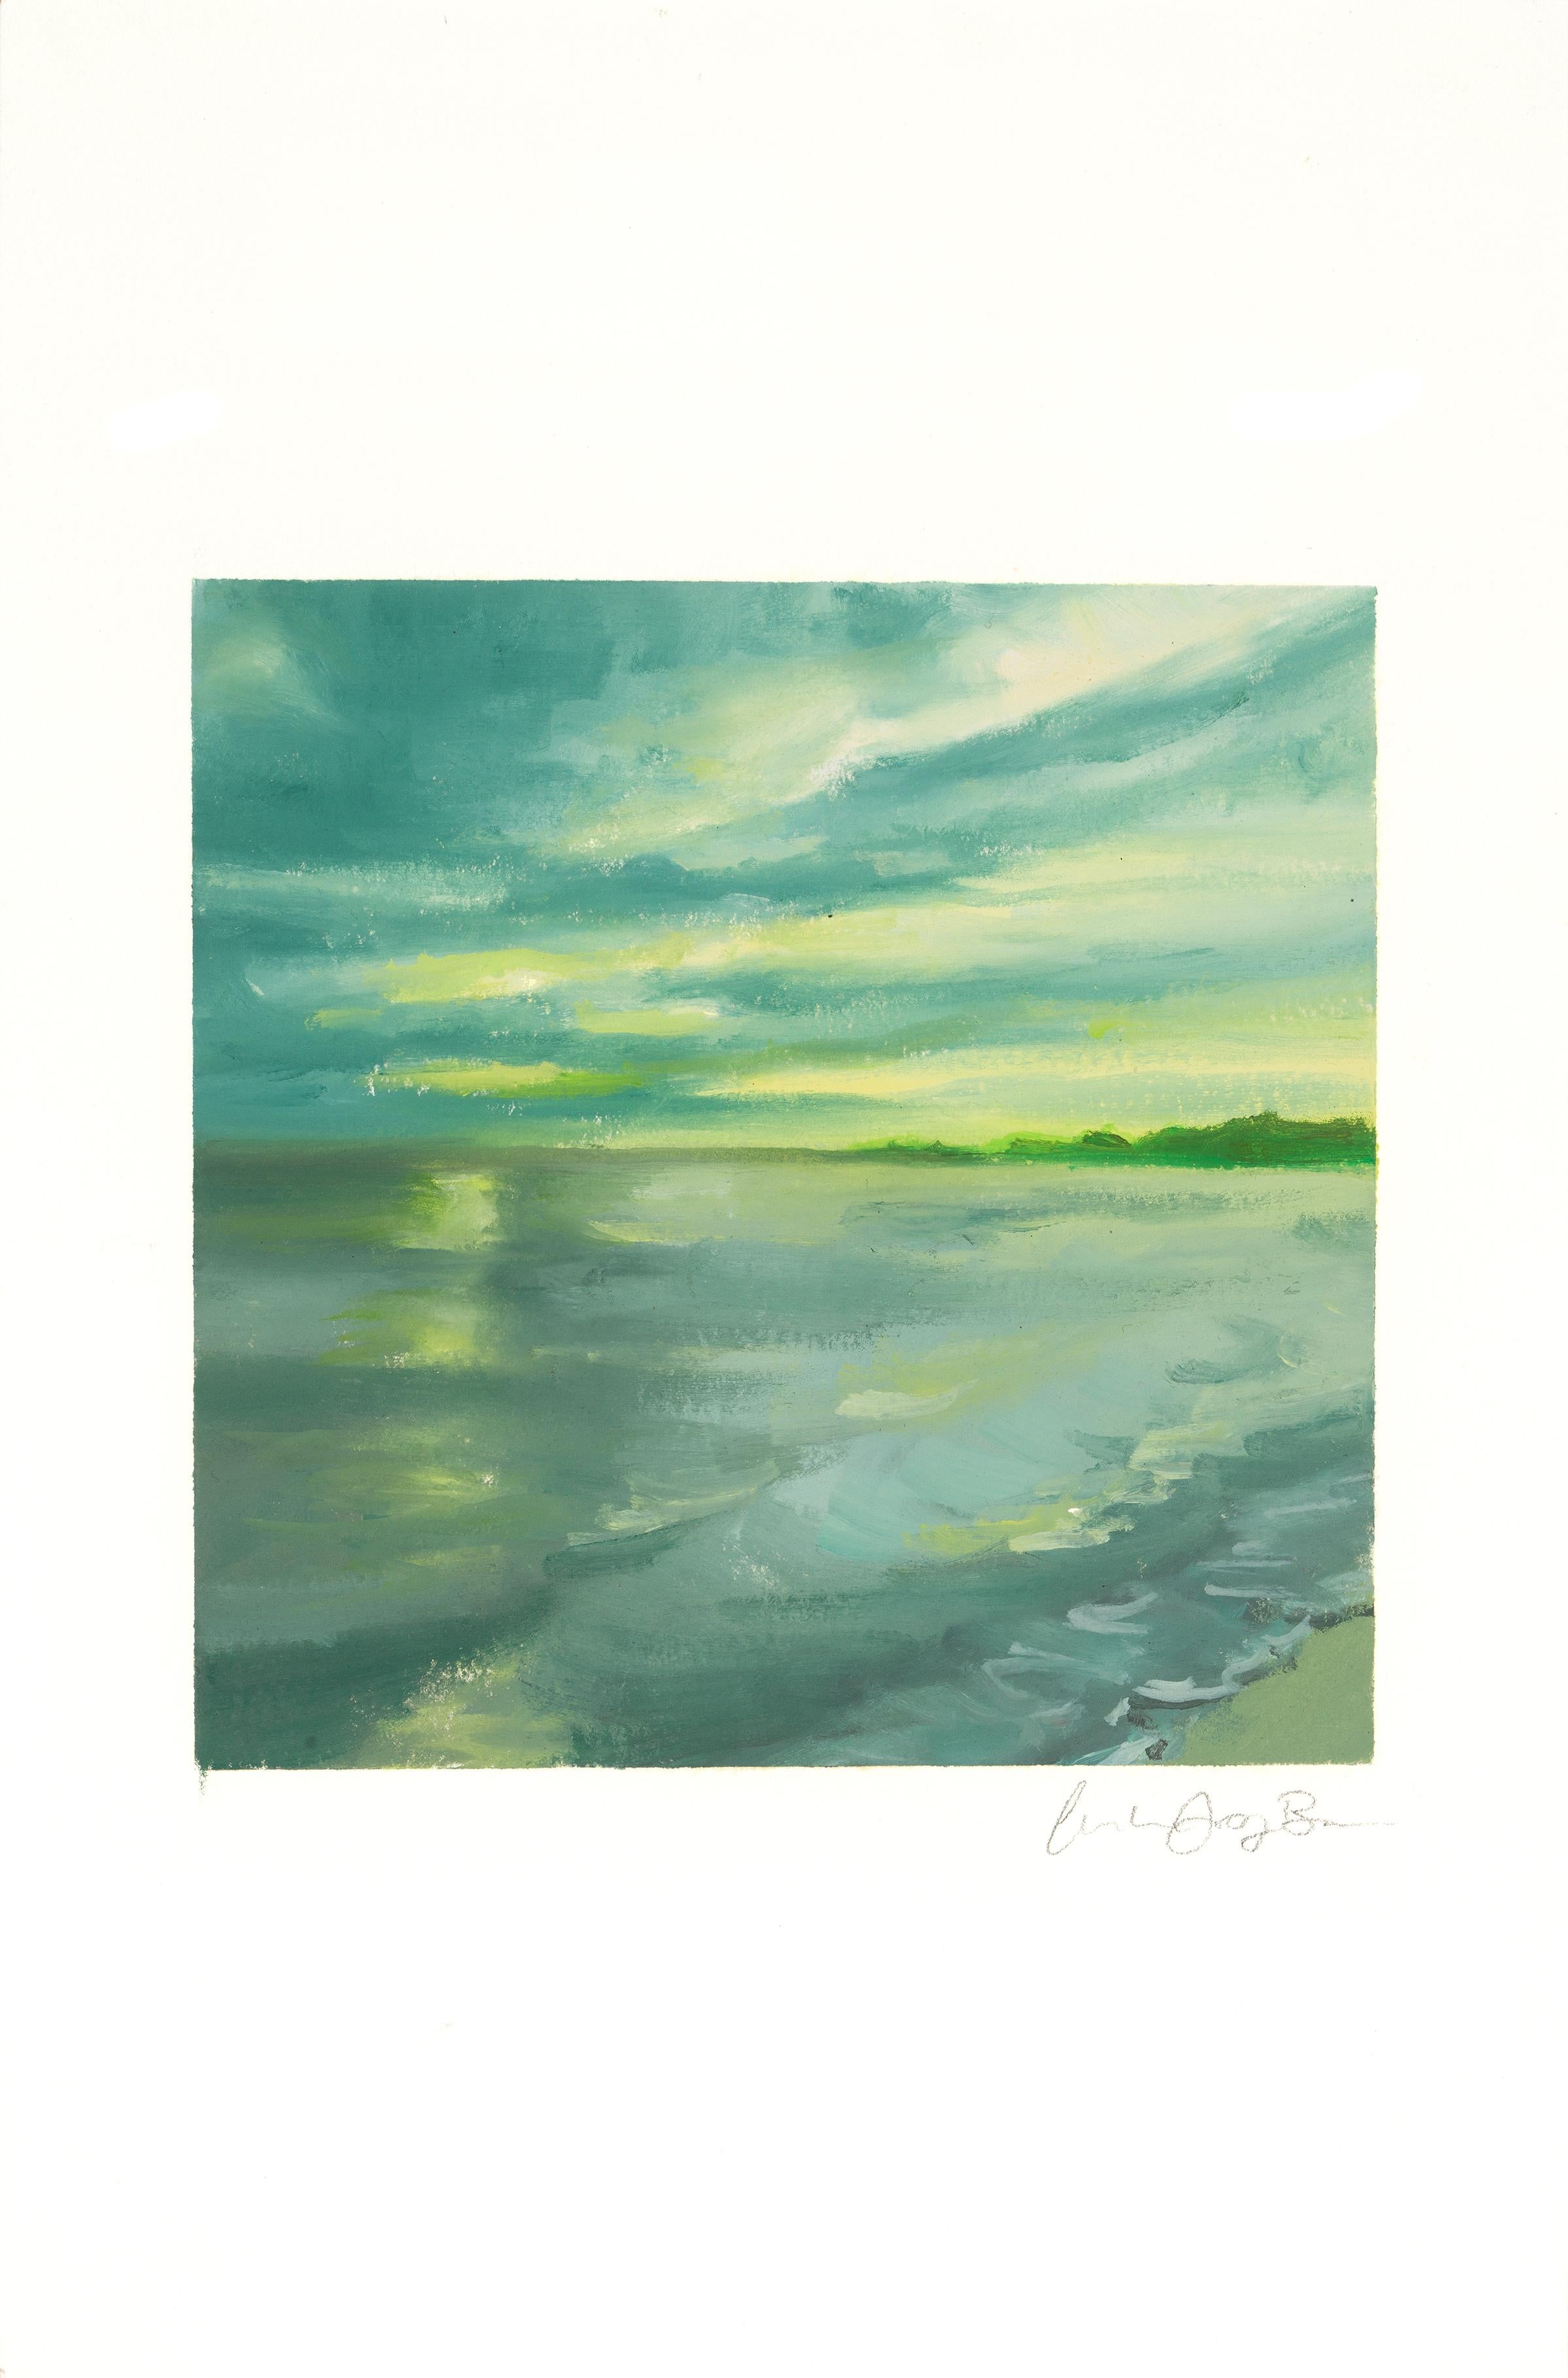 GREEN DUSK - Phthalo Painting of Morning View Ocean w/ Clouds, Sea, & Trees